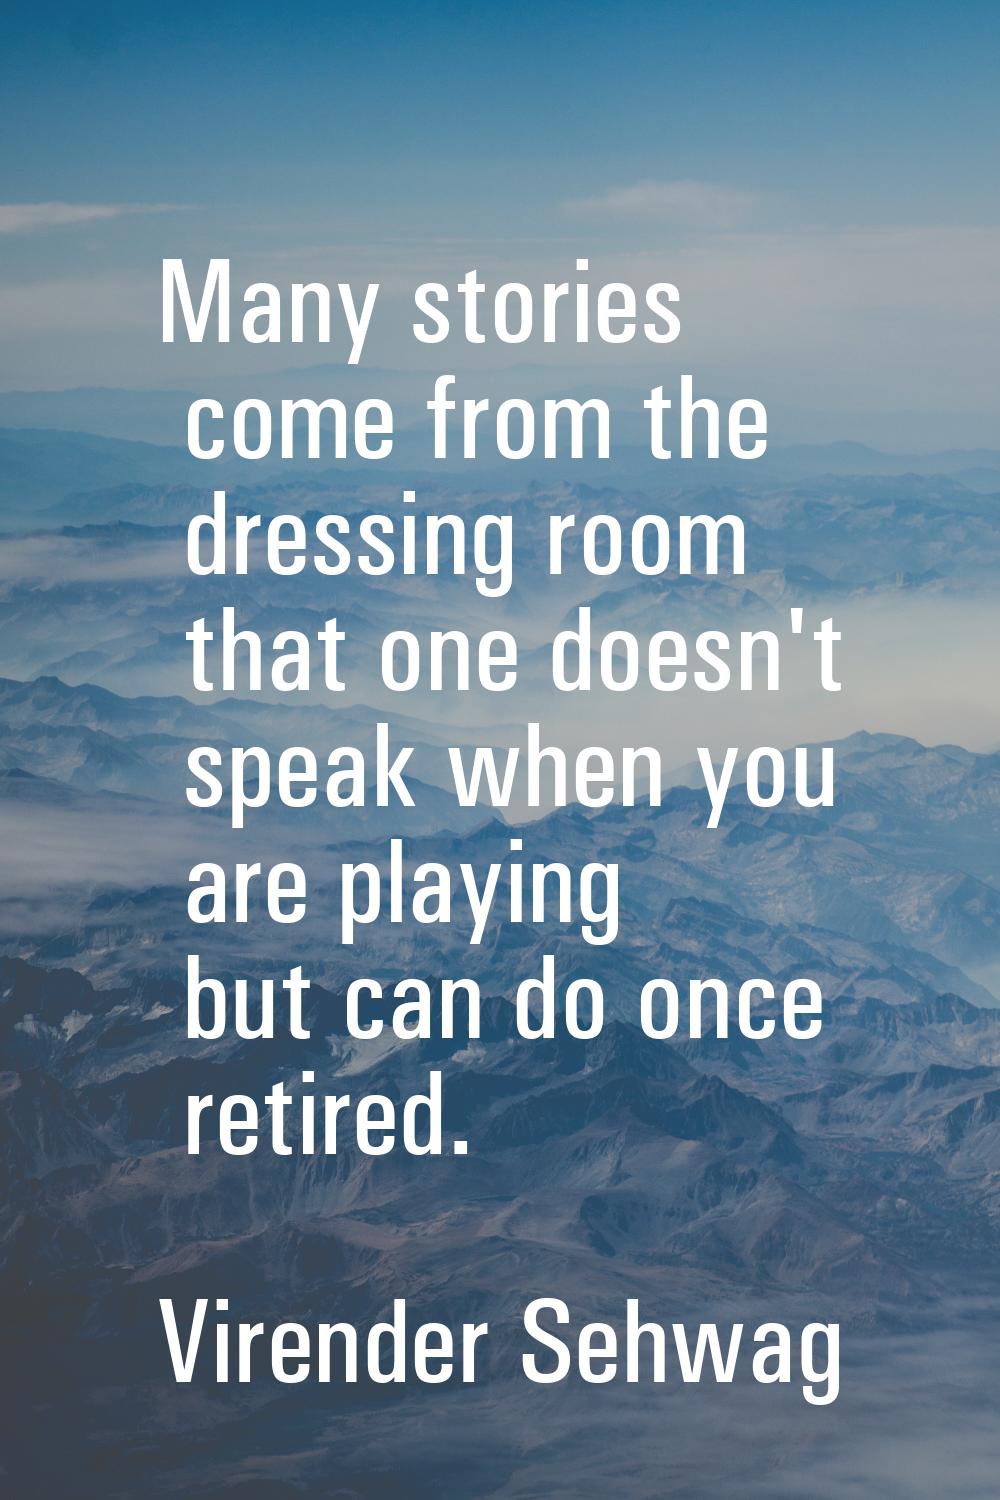 Many stories come from the dressing room that one doesn't speak when you are playing but can do onc